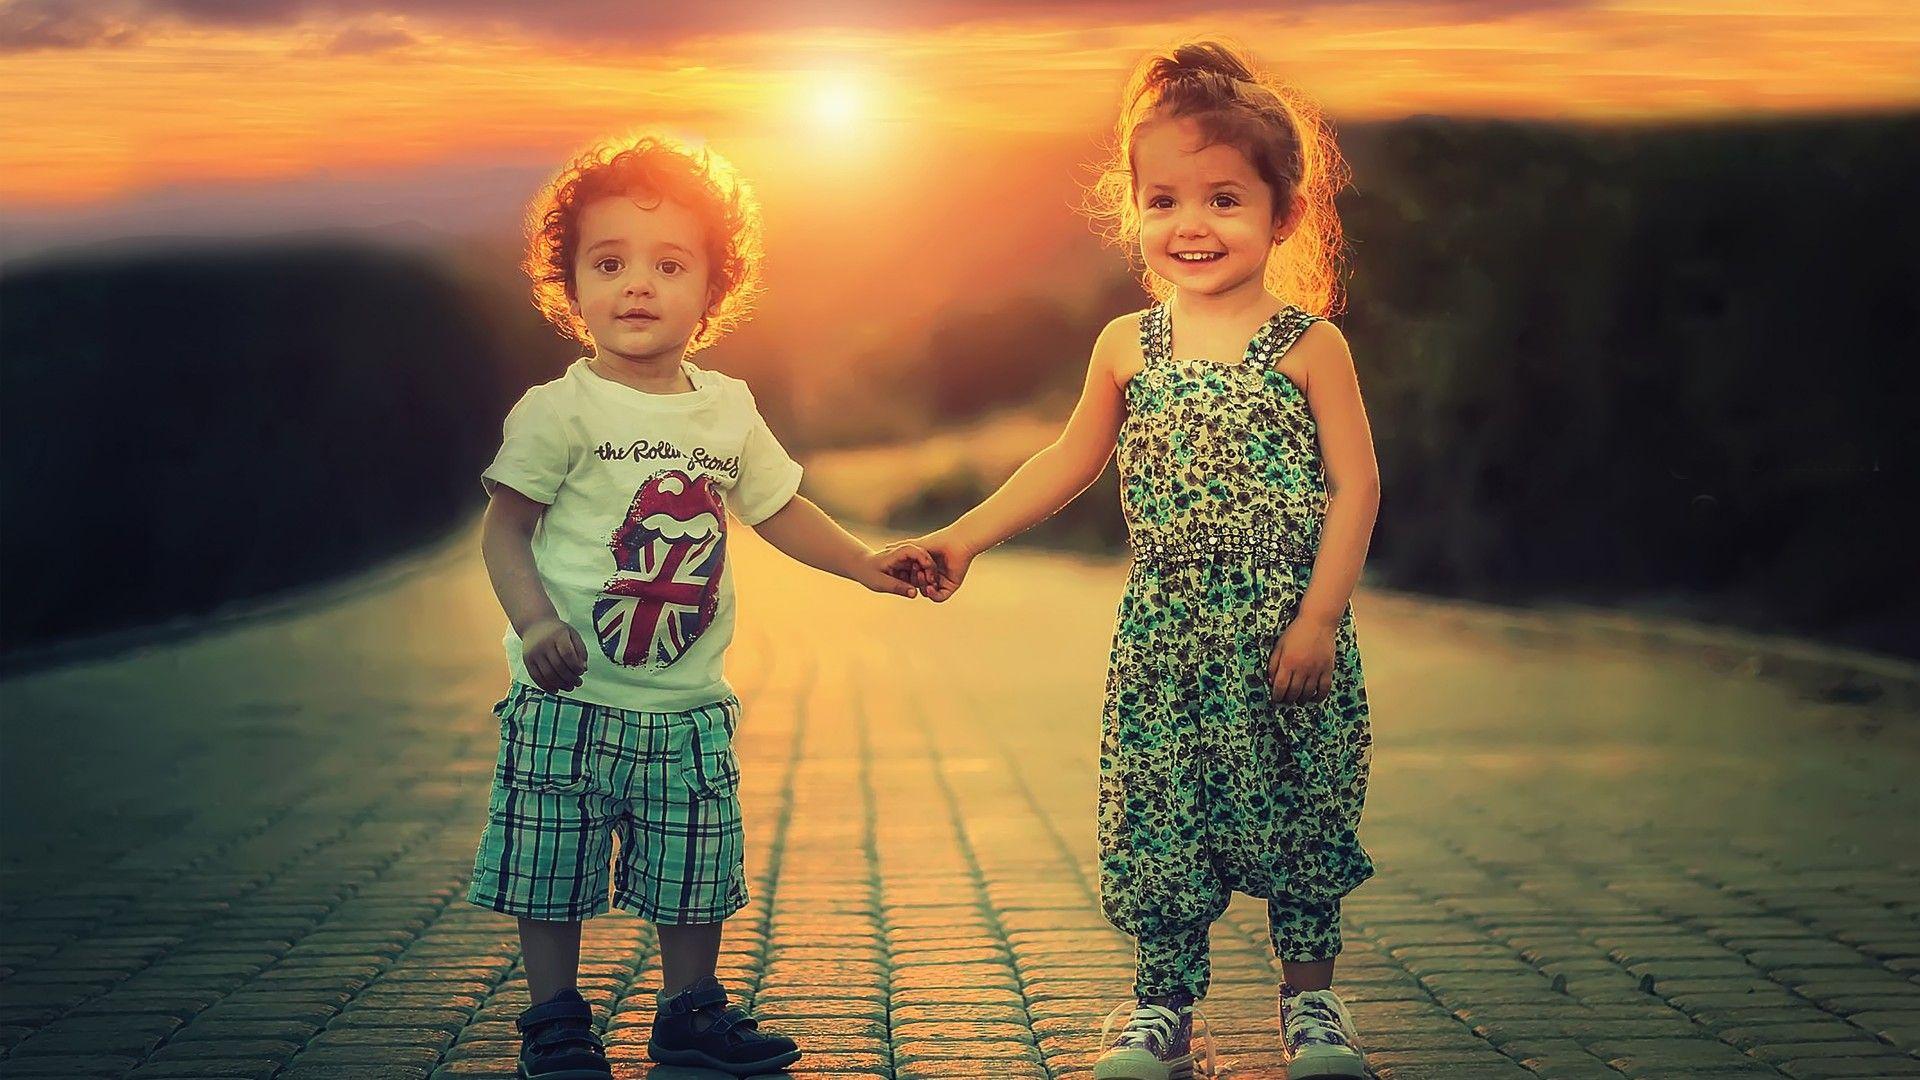 Cute Love Baby Couple Wallpaper For Mobile. (69++ Wallpaper)